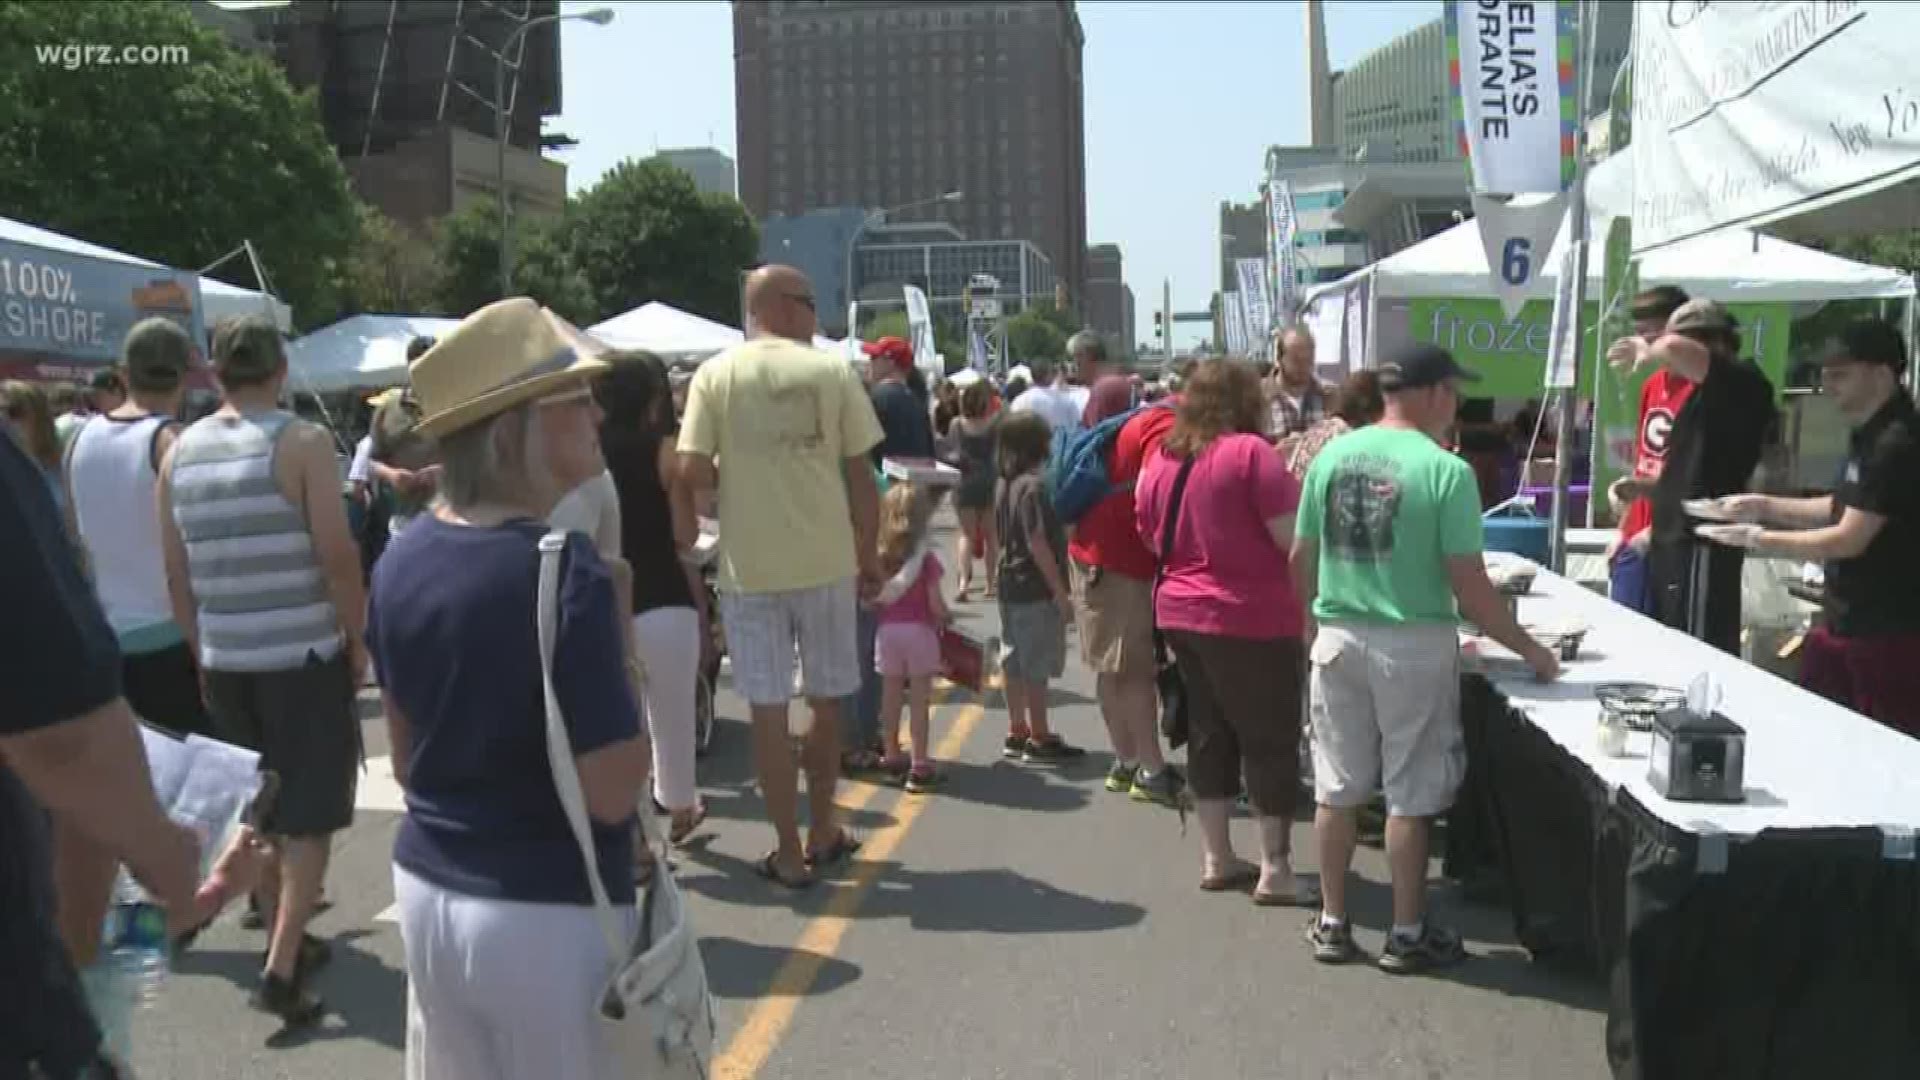 The festival will return to downtown Buffalo Saturday and Sunday.